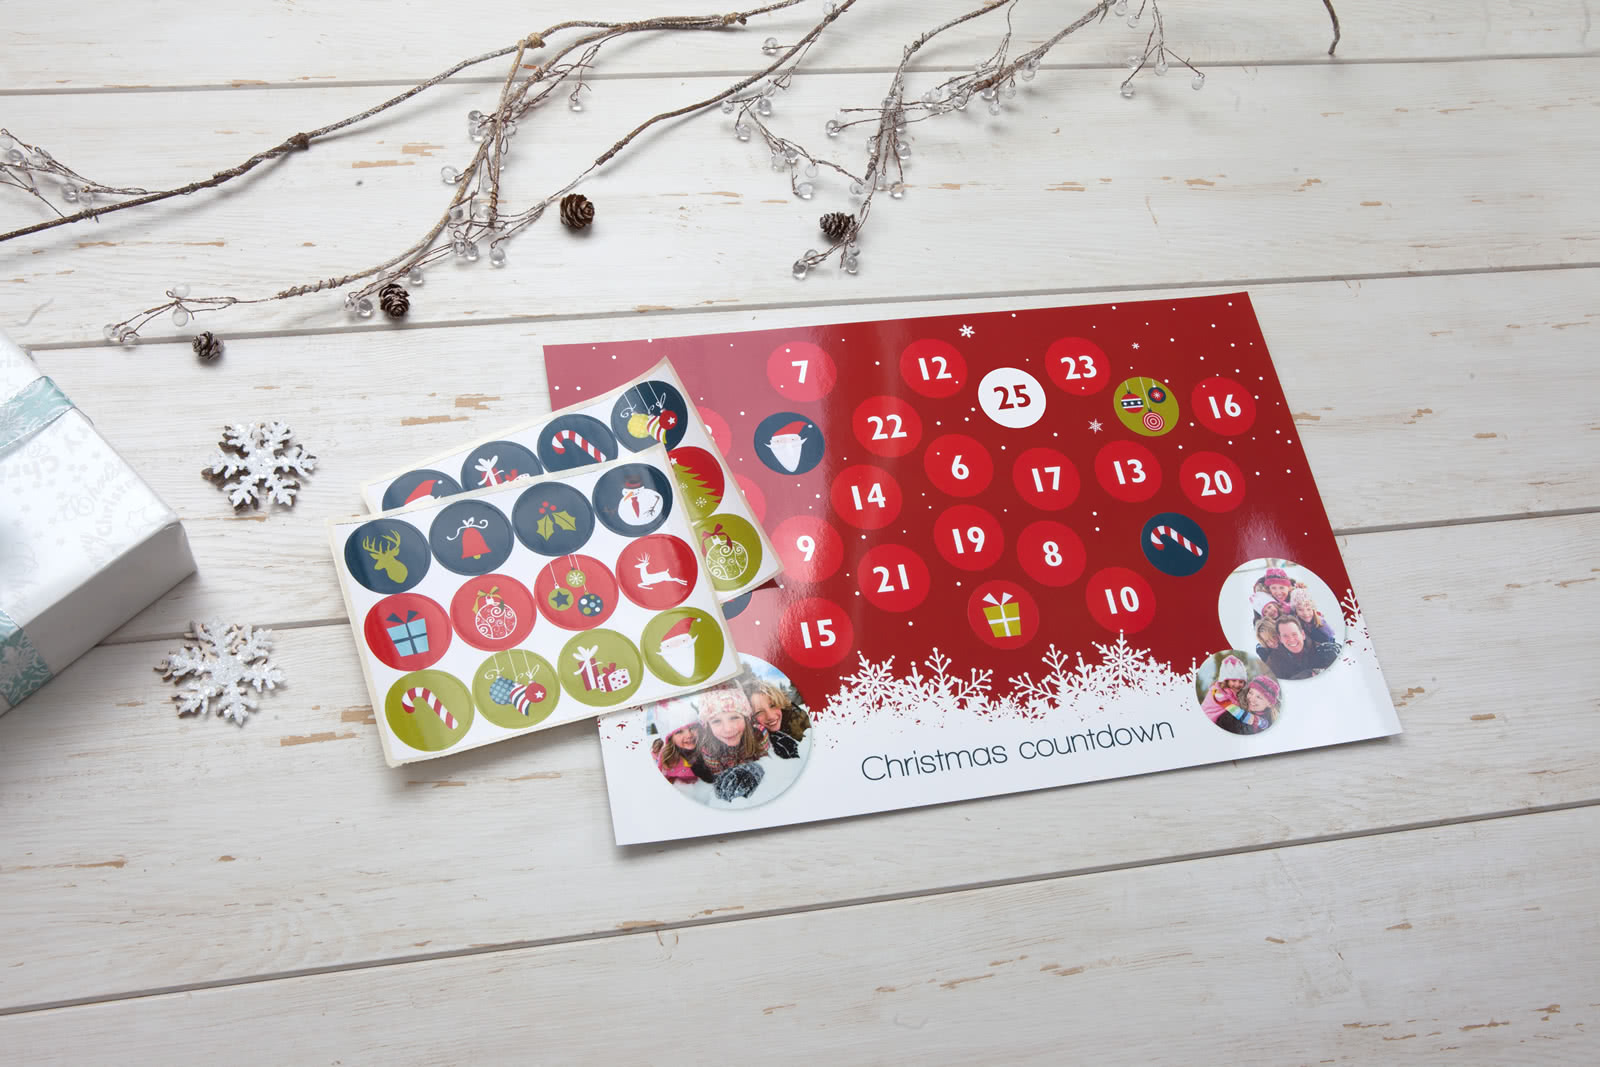 Create a nice Advent Calendar to count down the days for Christmas at